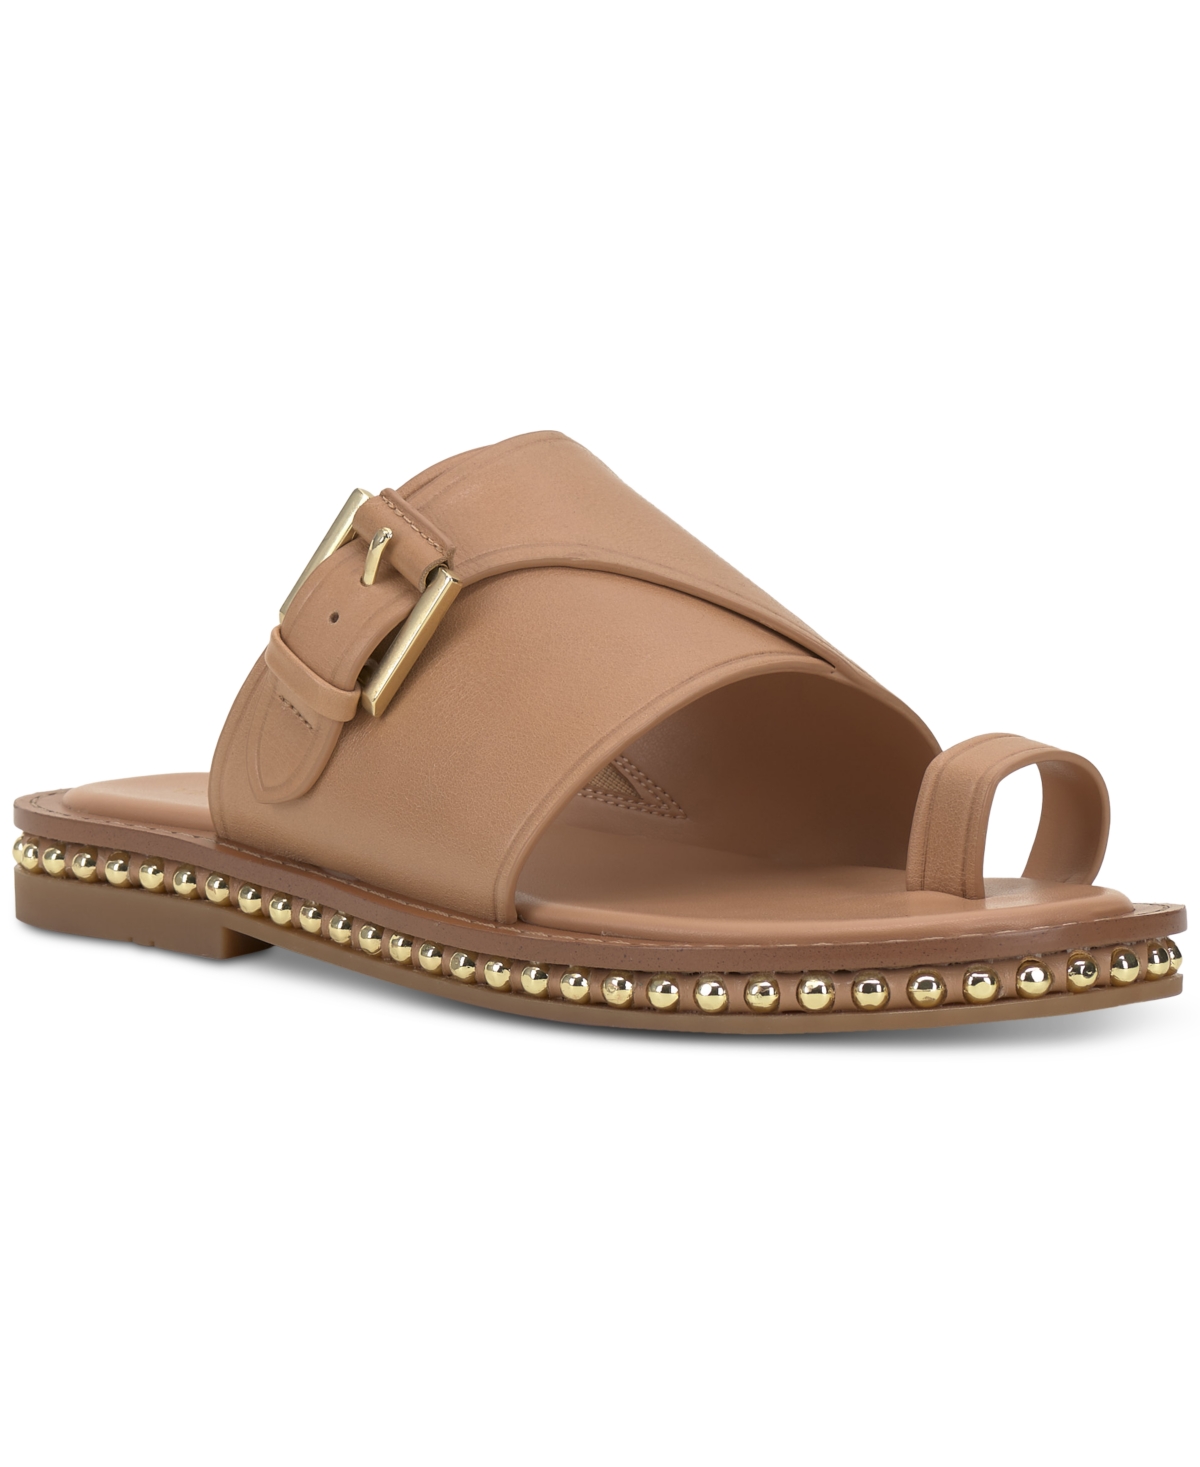 UPC 196672388604 product image for Vince Camuto Women's Cooliann Hooded Thong Flat Sandals Women's Shoes | upcitemdb.com